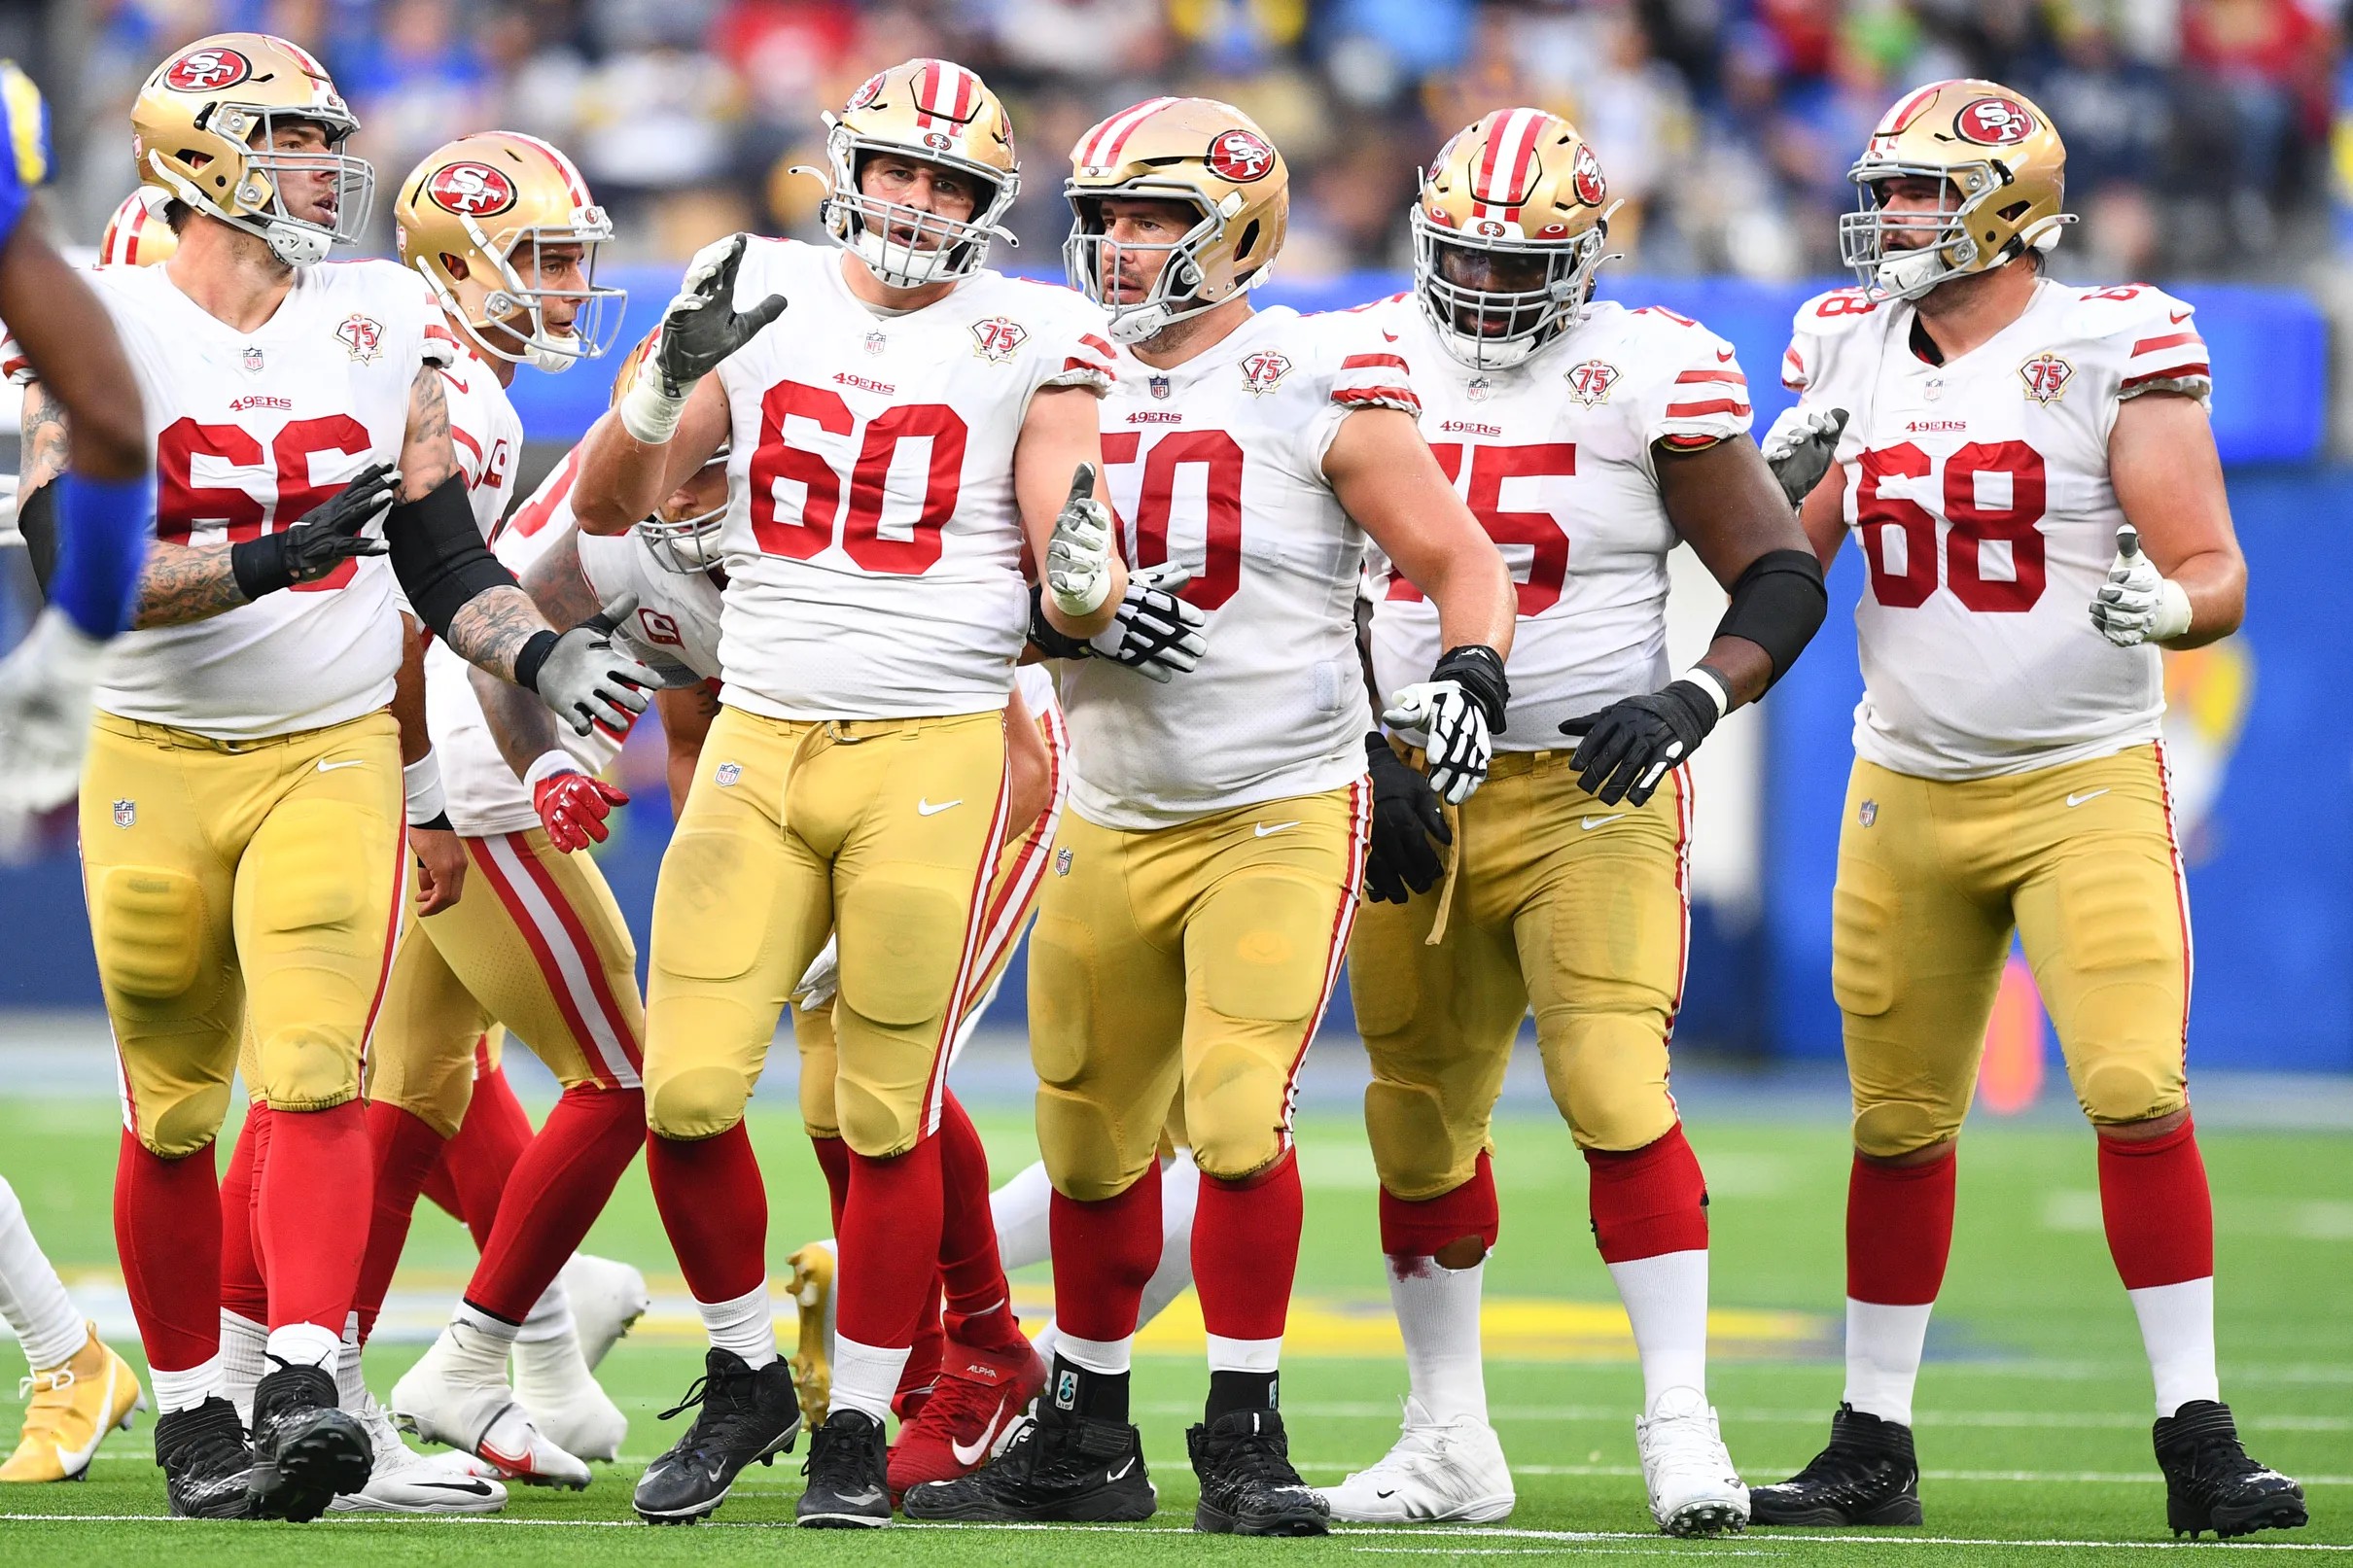 PFF ranks the 49ers offensive line as the 14thbest unit heading into 2022